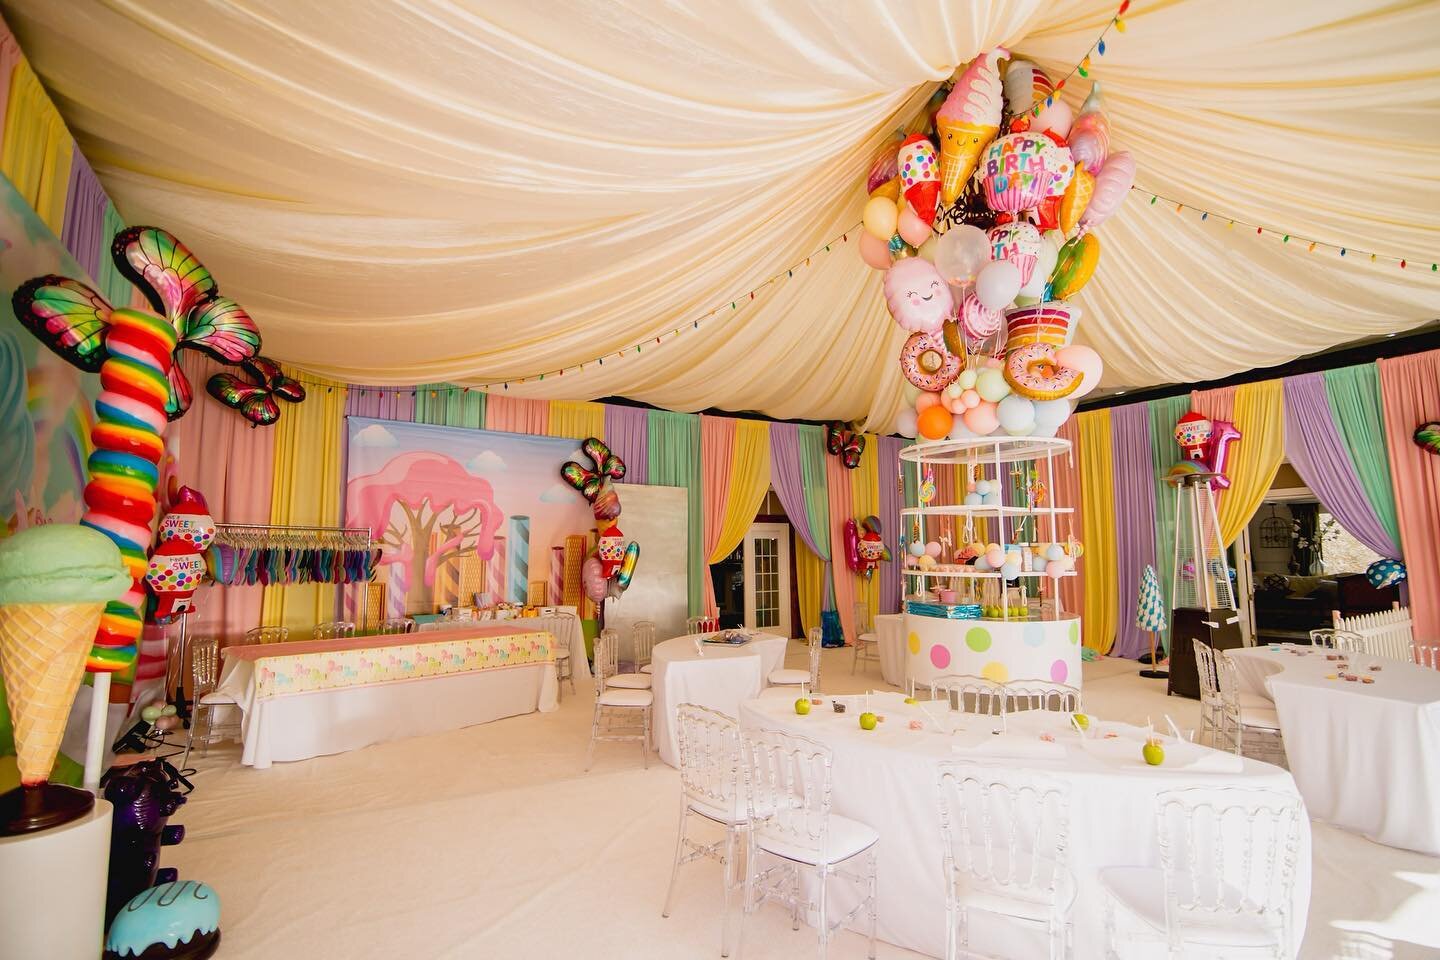 One of my favorite parts of the party 🙌🏼 The serpentine tables perfectly fit around this amazing center piece filled with goodies 🌈 What do you think about the color draping surrounding this magical room ? 🪄
Event Design: @susannemardirosian
Vend